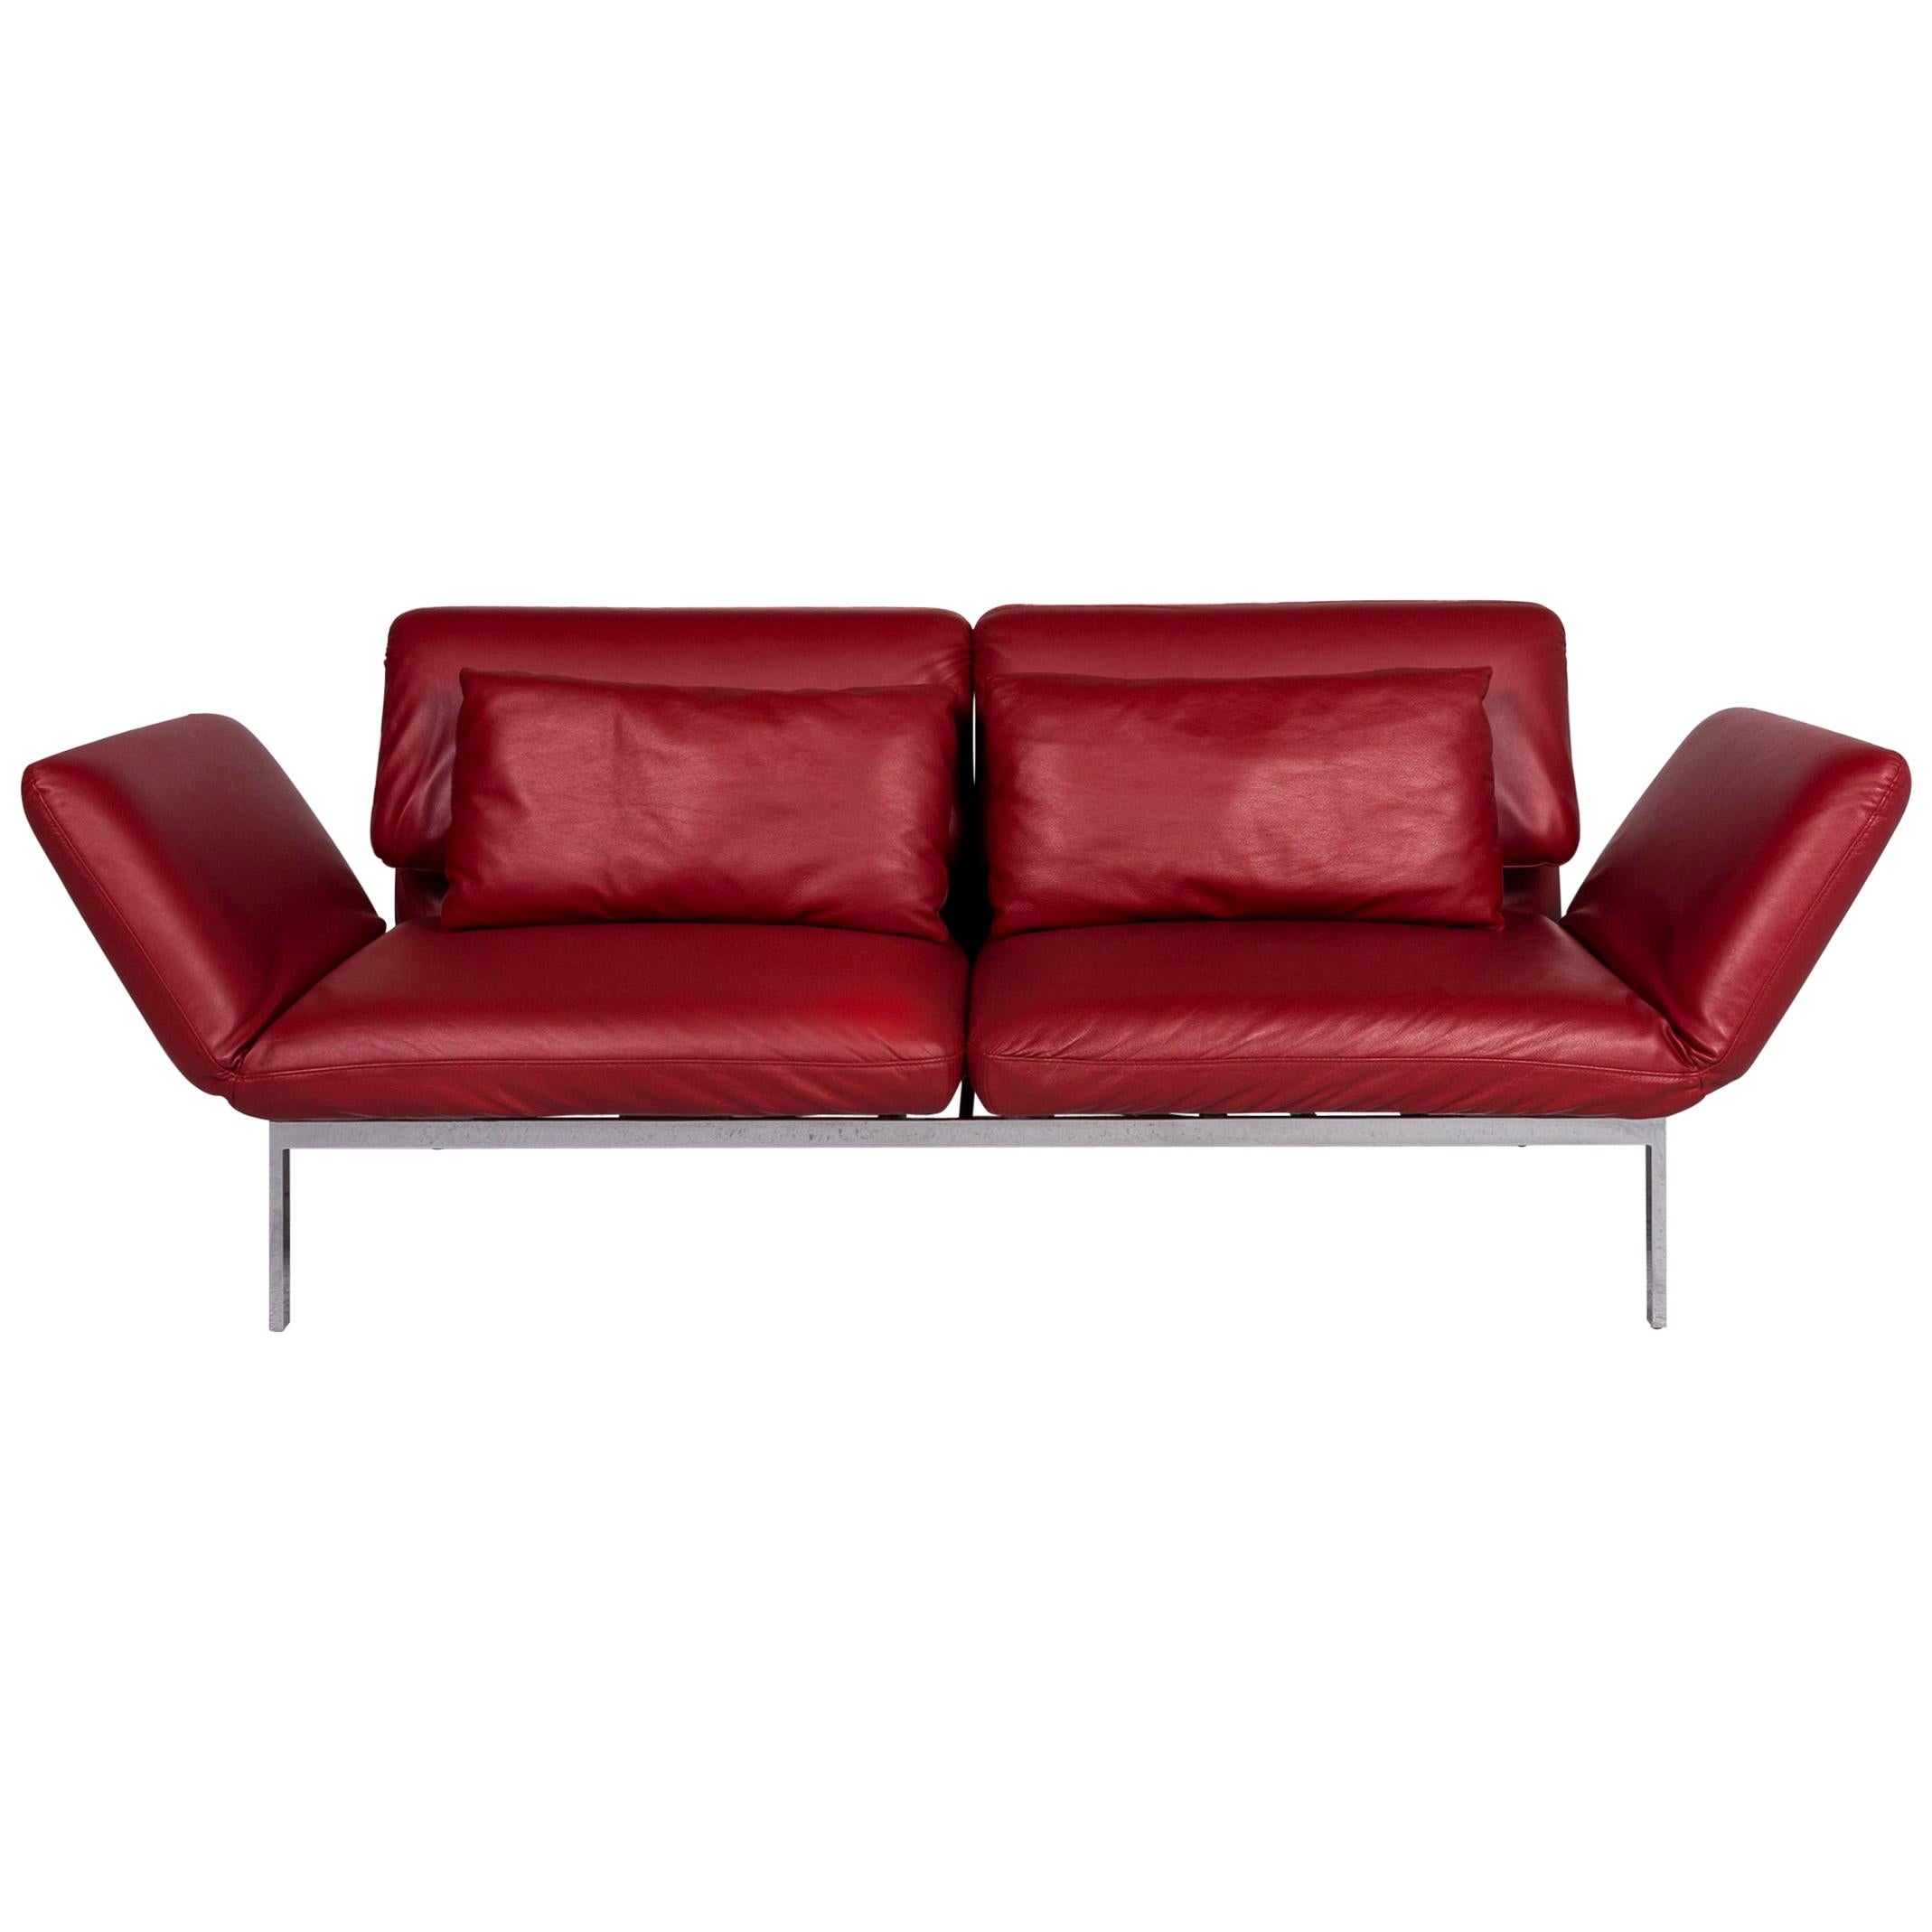 Brühl & Sippold Roro Designer Leather Sofa Red Two-Seat Relax Function Couch